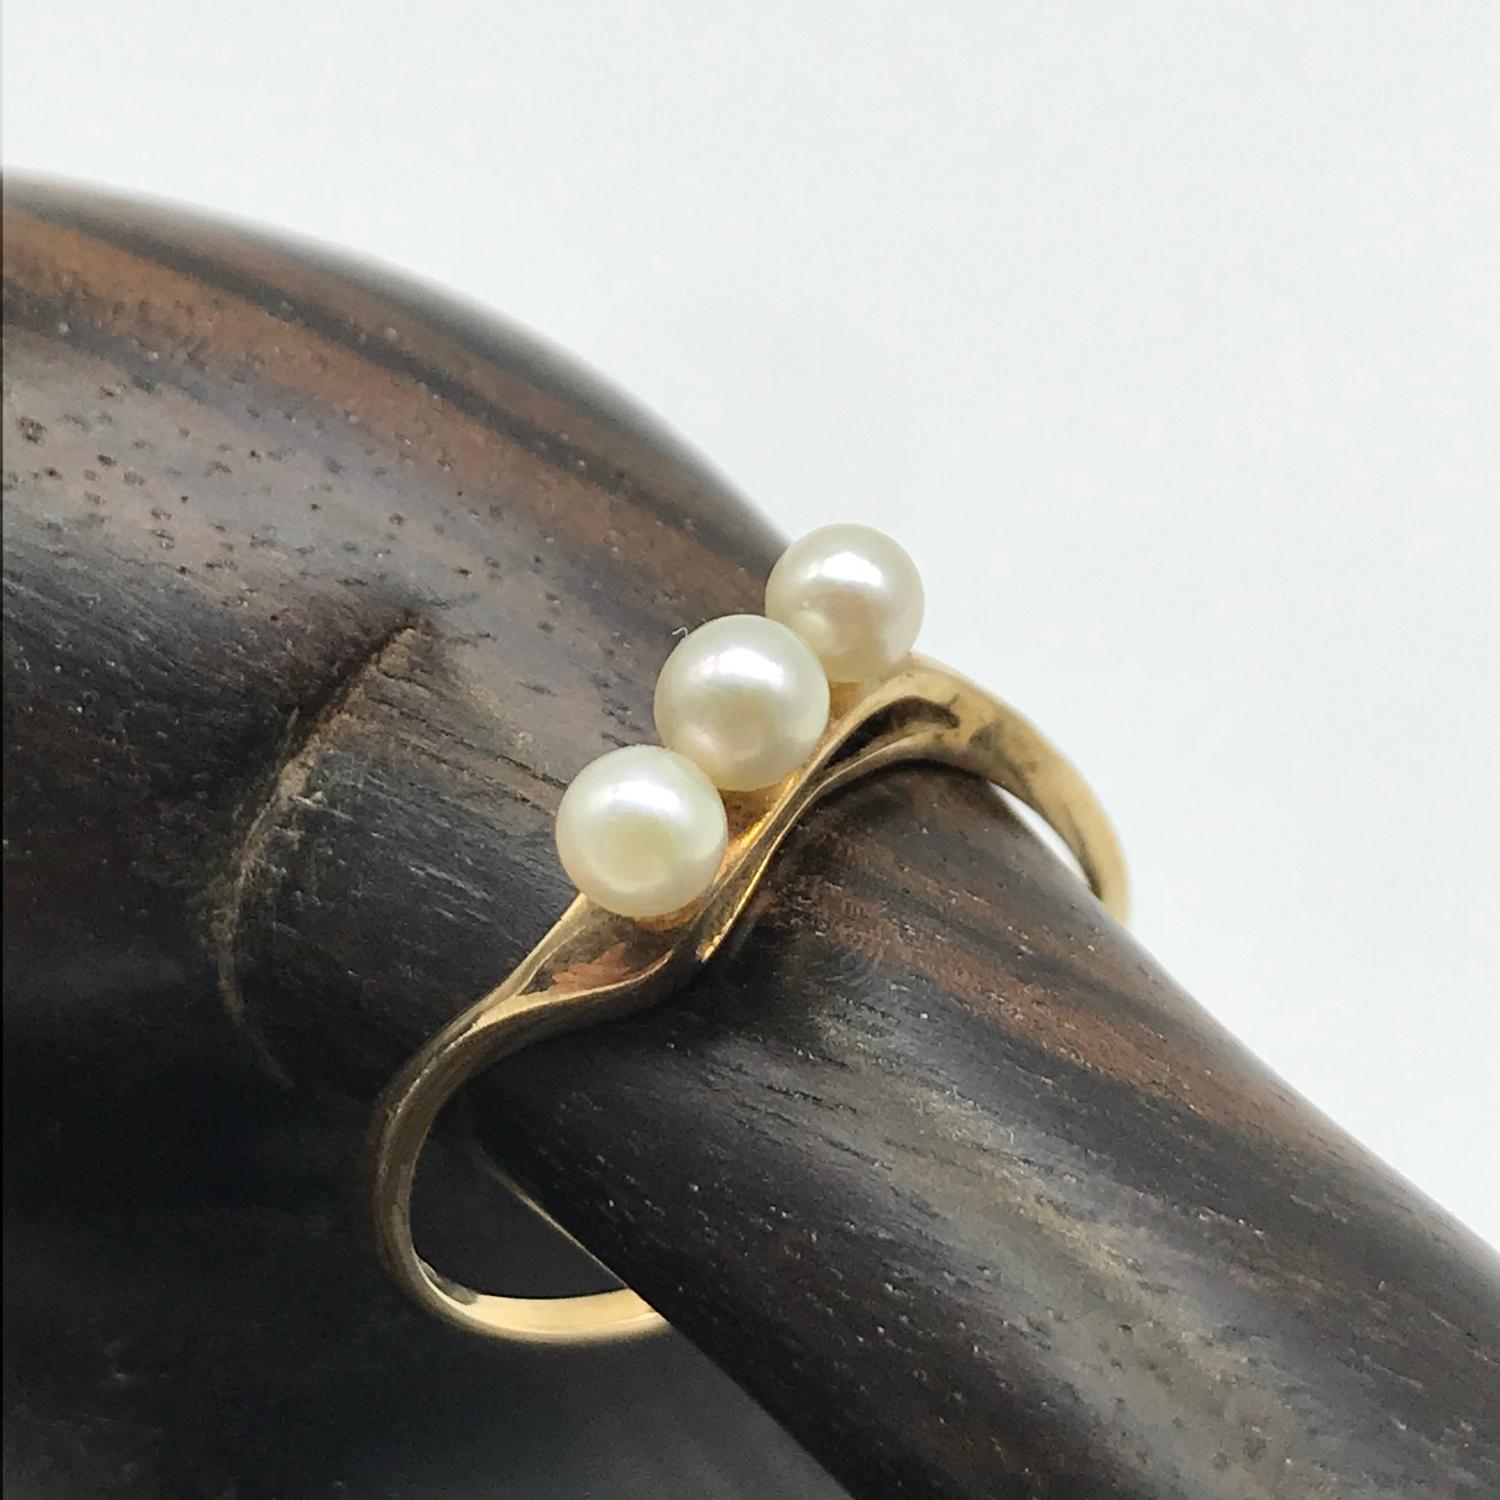 A Ladies 9ct gold twist ring set with three pearls. Ring size P and weighs 1.50grams.